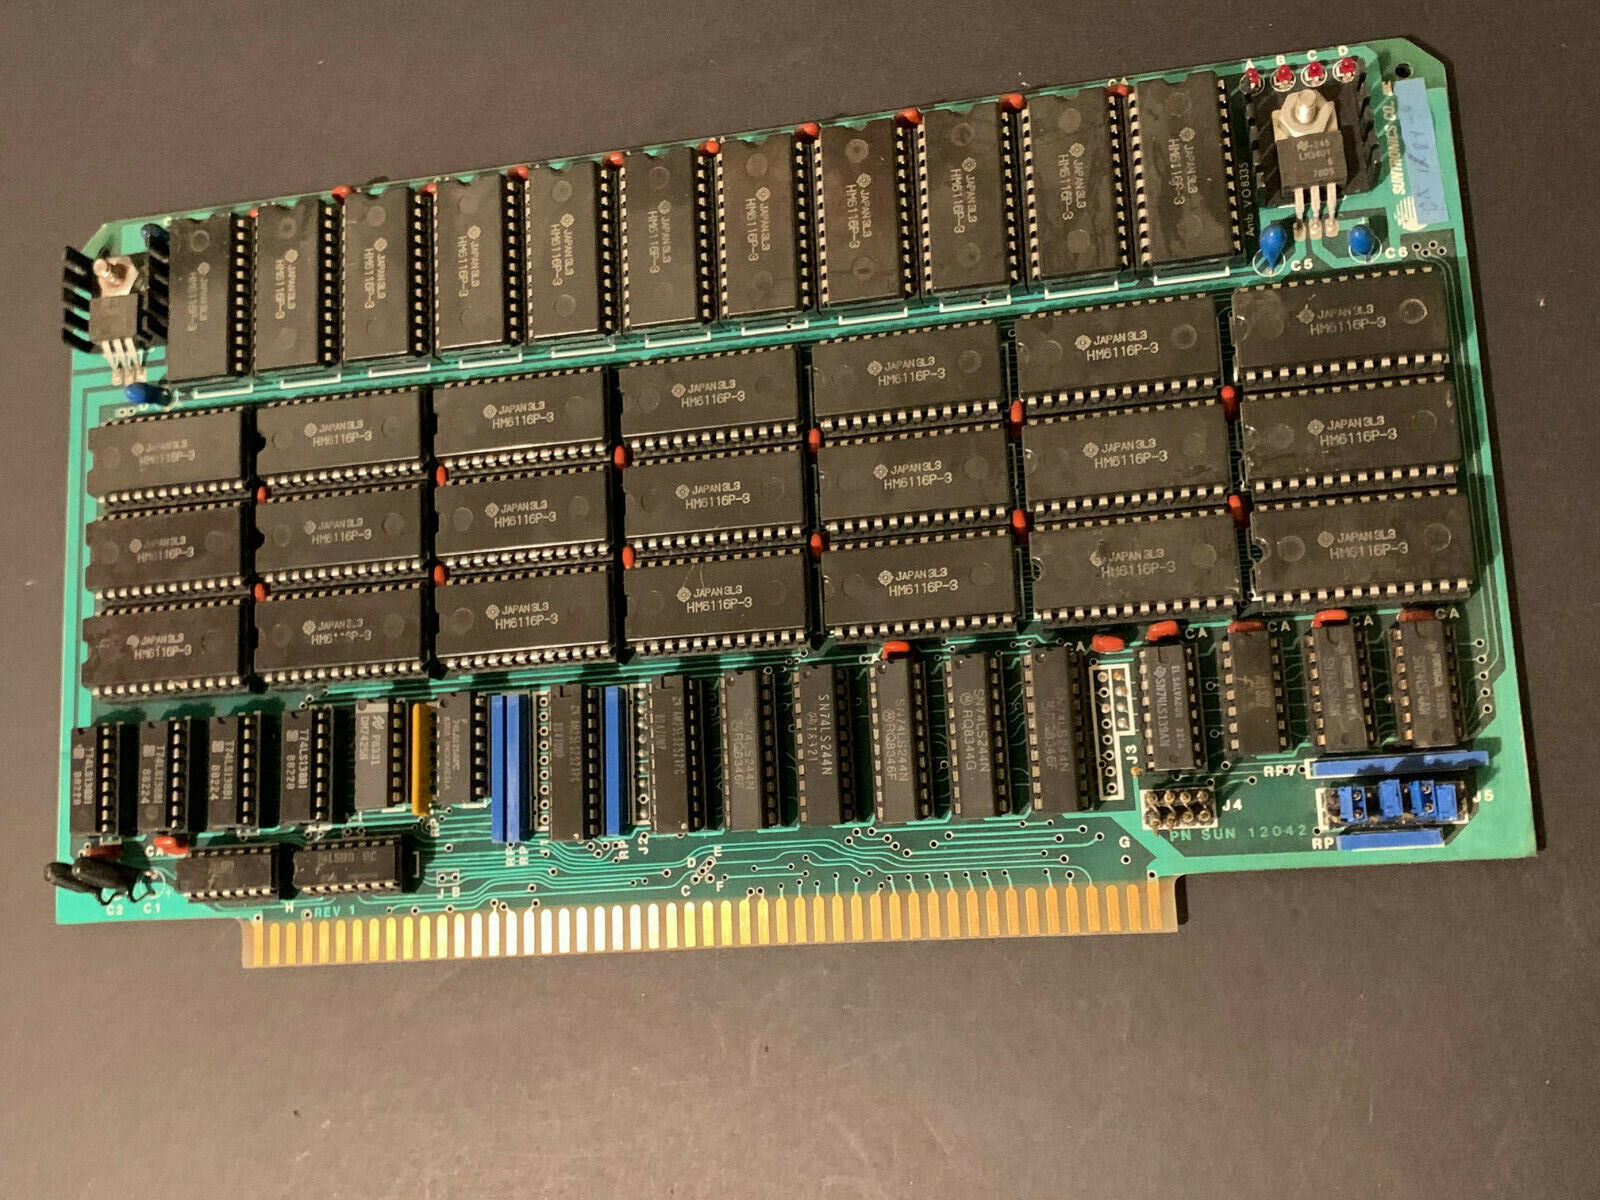 S-100 ALTAIR MITS Static RAM Memory Board VINTAGE (32) HM6116-3 IC'S SOCKETED